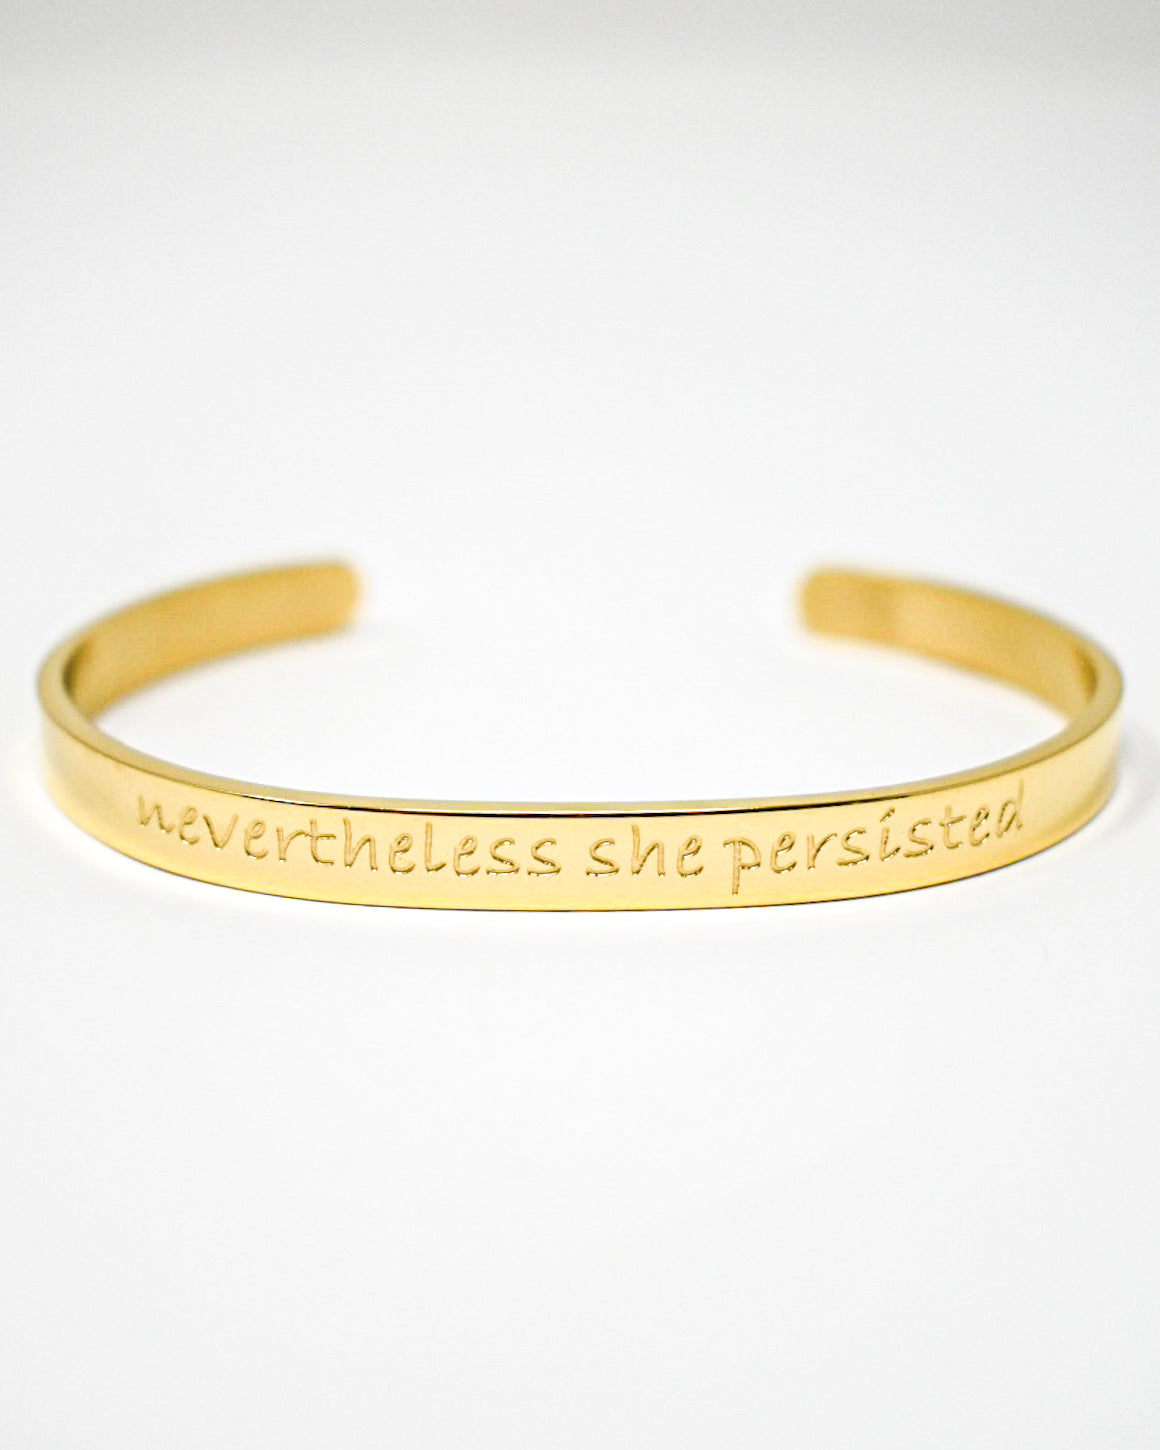 She Persisted Cuff Bracelet